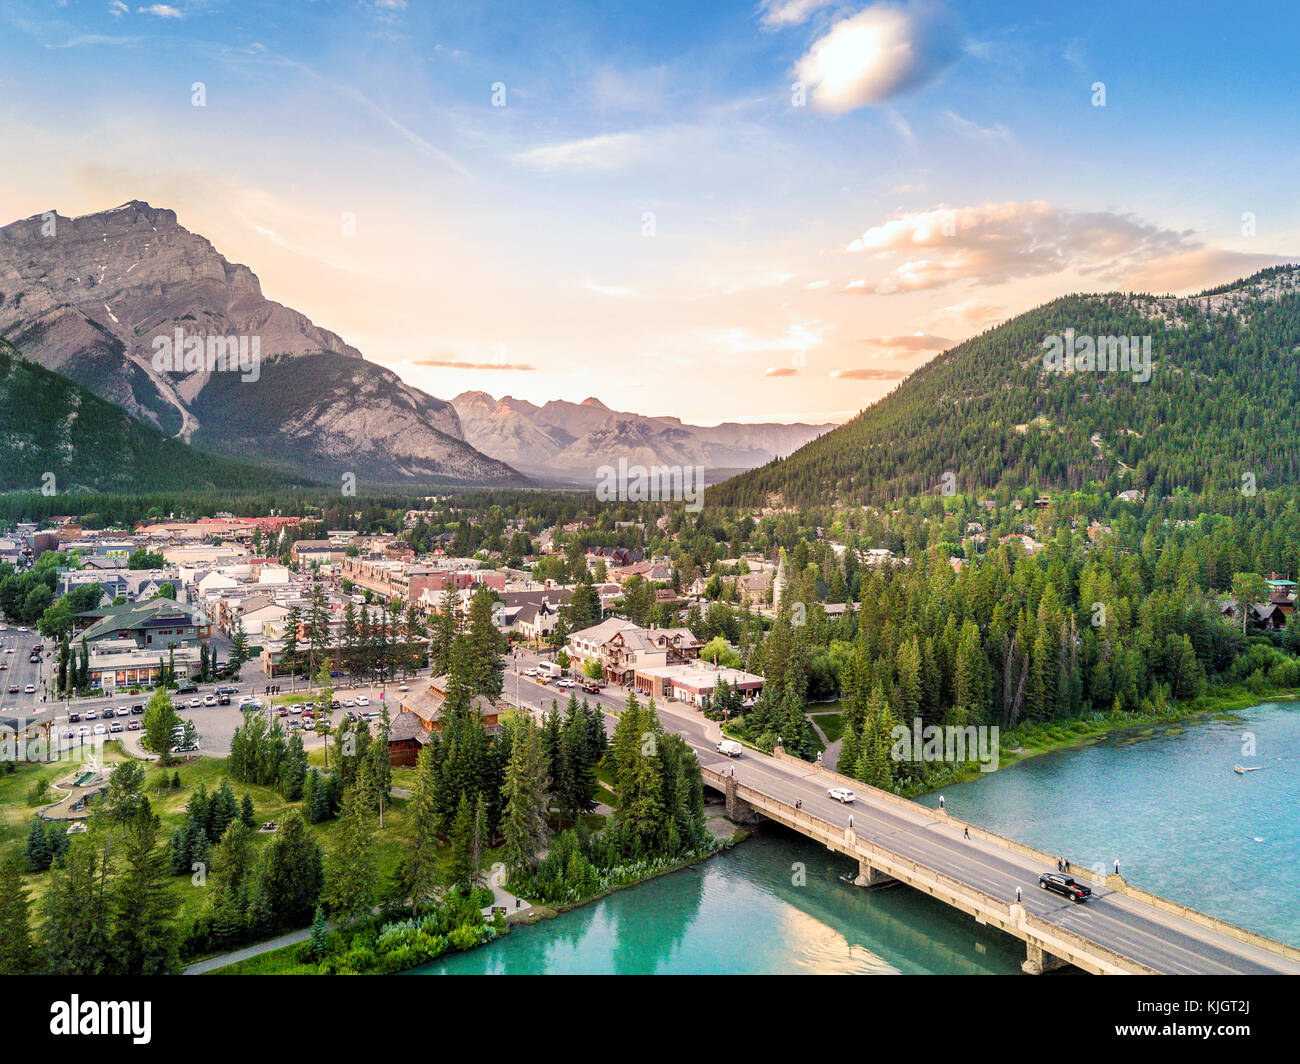 Amazing cityscape of Banff in canadian Rocky Mountains, Alberta,Canada Stock Photo